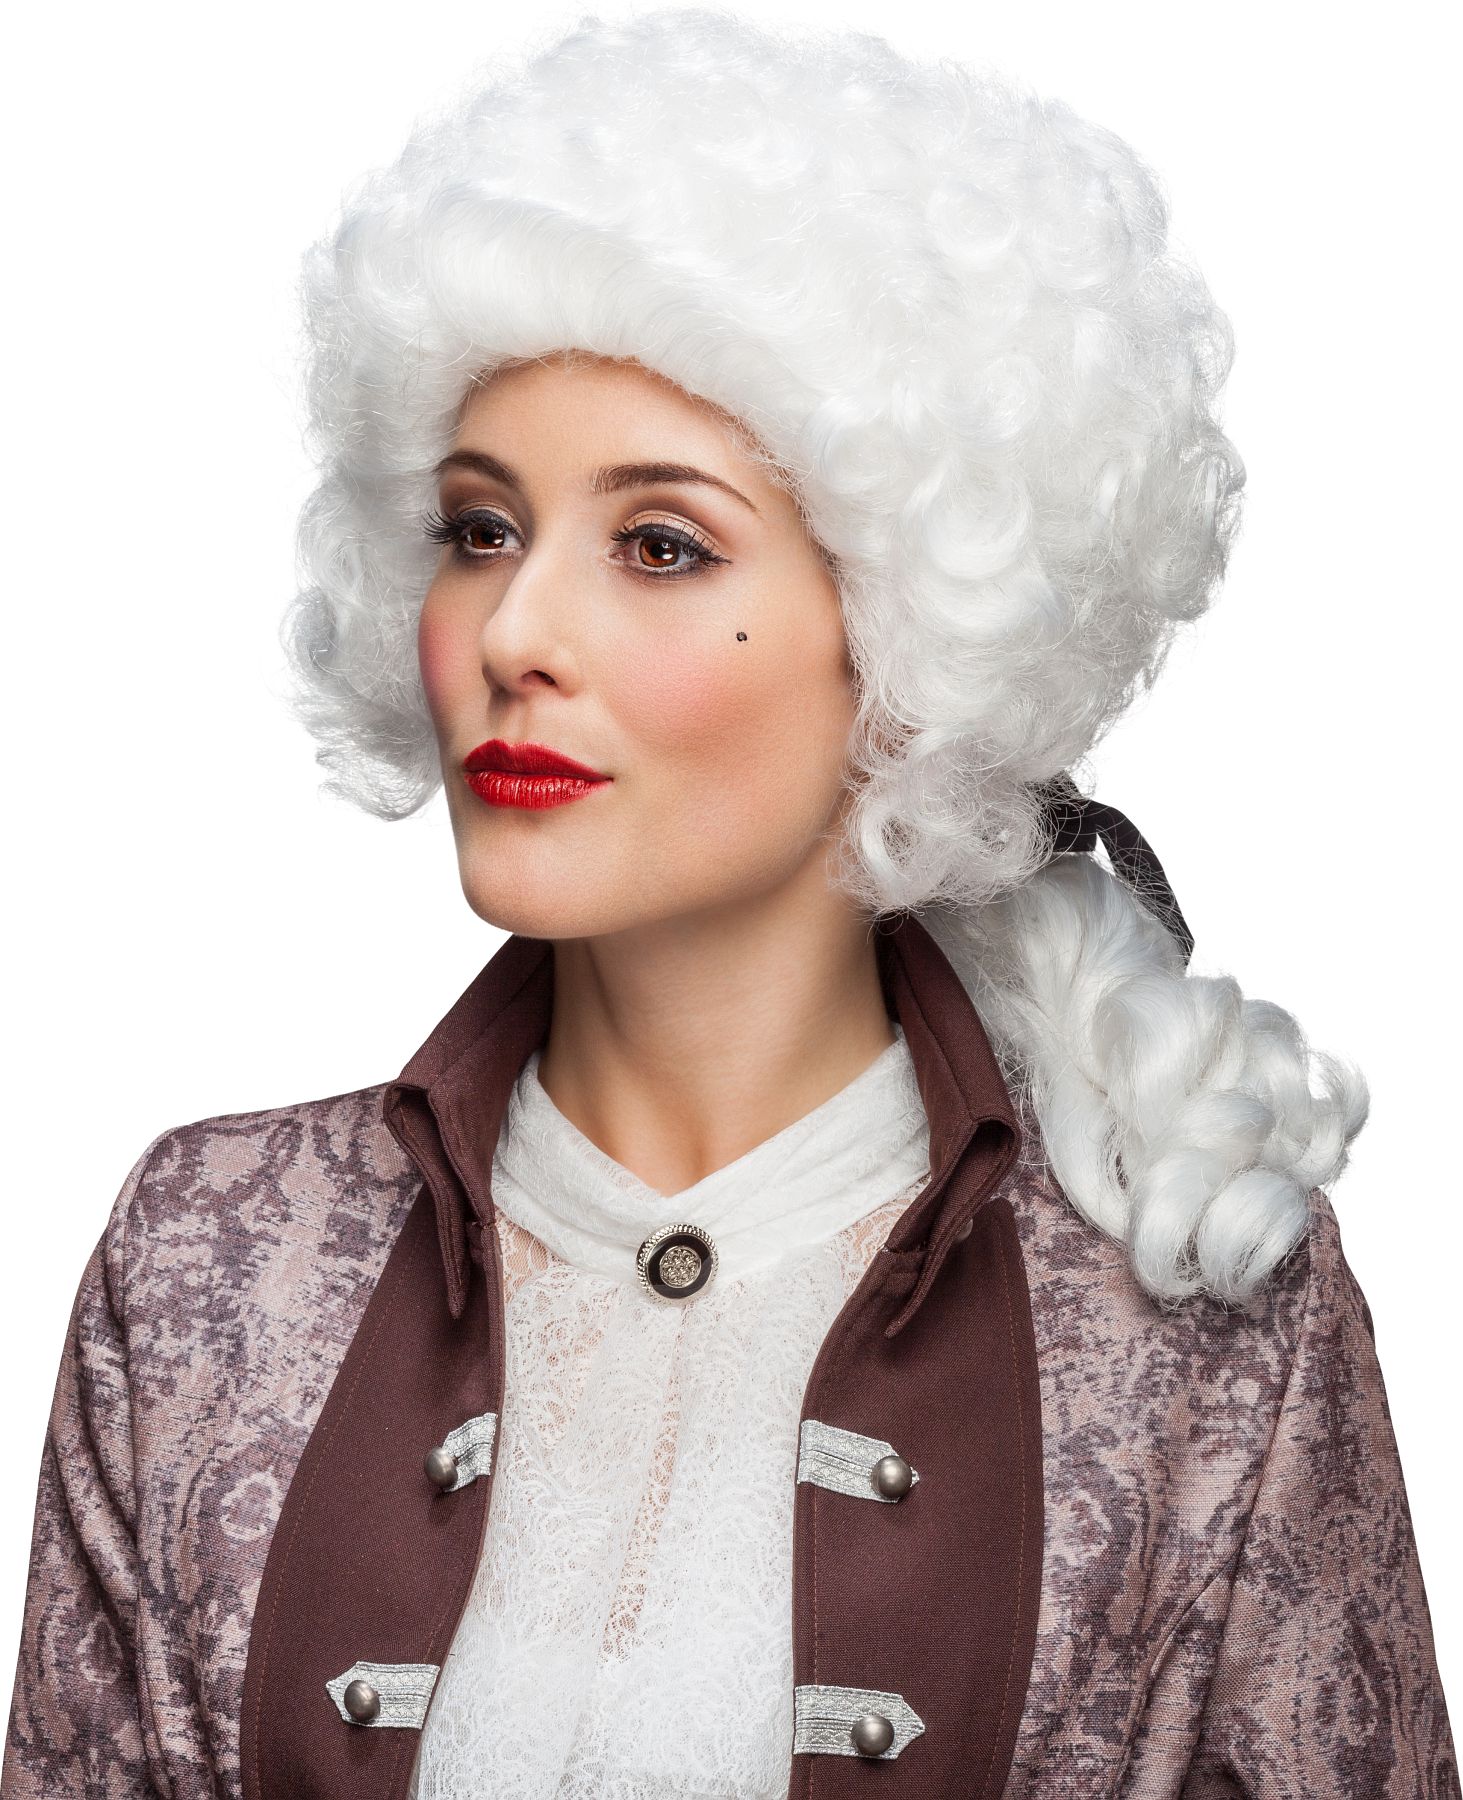 Baroque wig with open braid, white